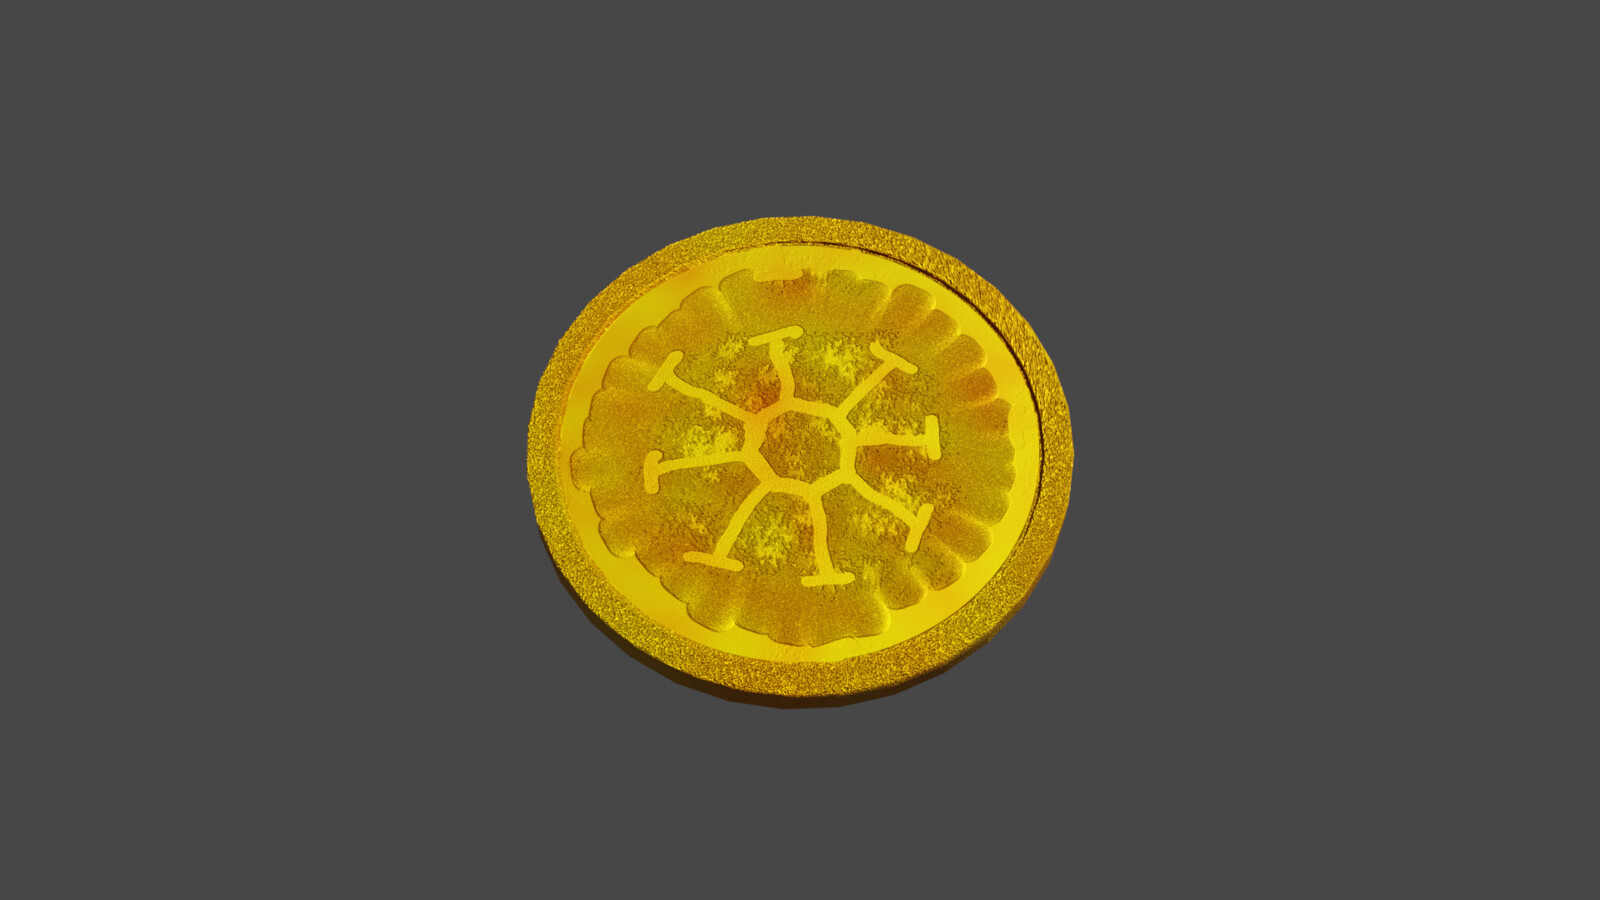 Azathoth coin, 1080p. I think I can reduce the LOD down to about 50 faces if I need to, without killing the shape; it's currently just short of 400. (Modern GPUs let us get away with murder...)